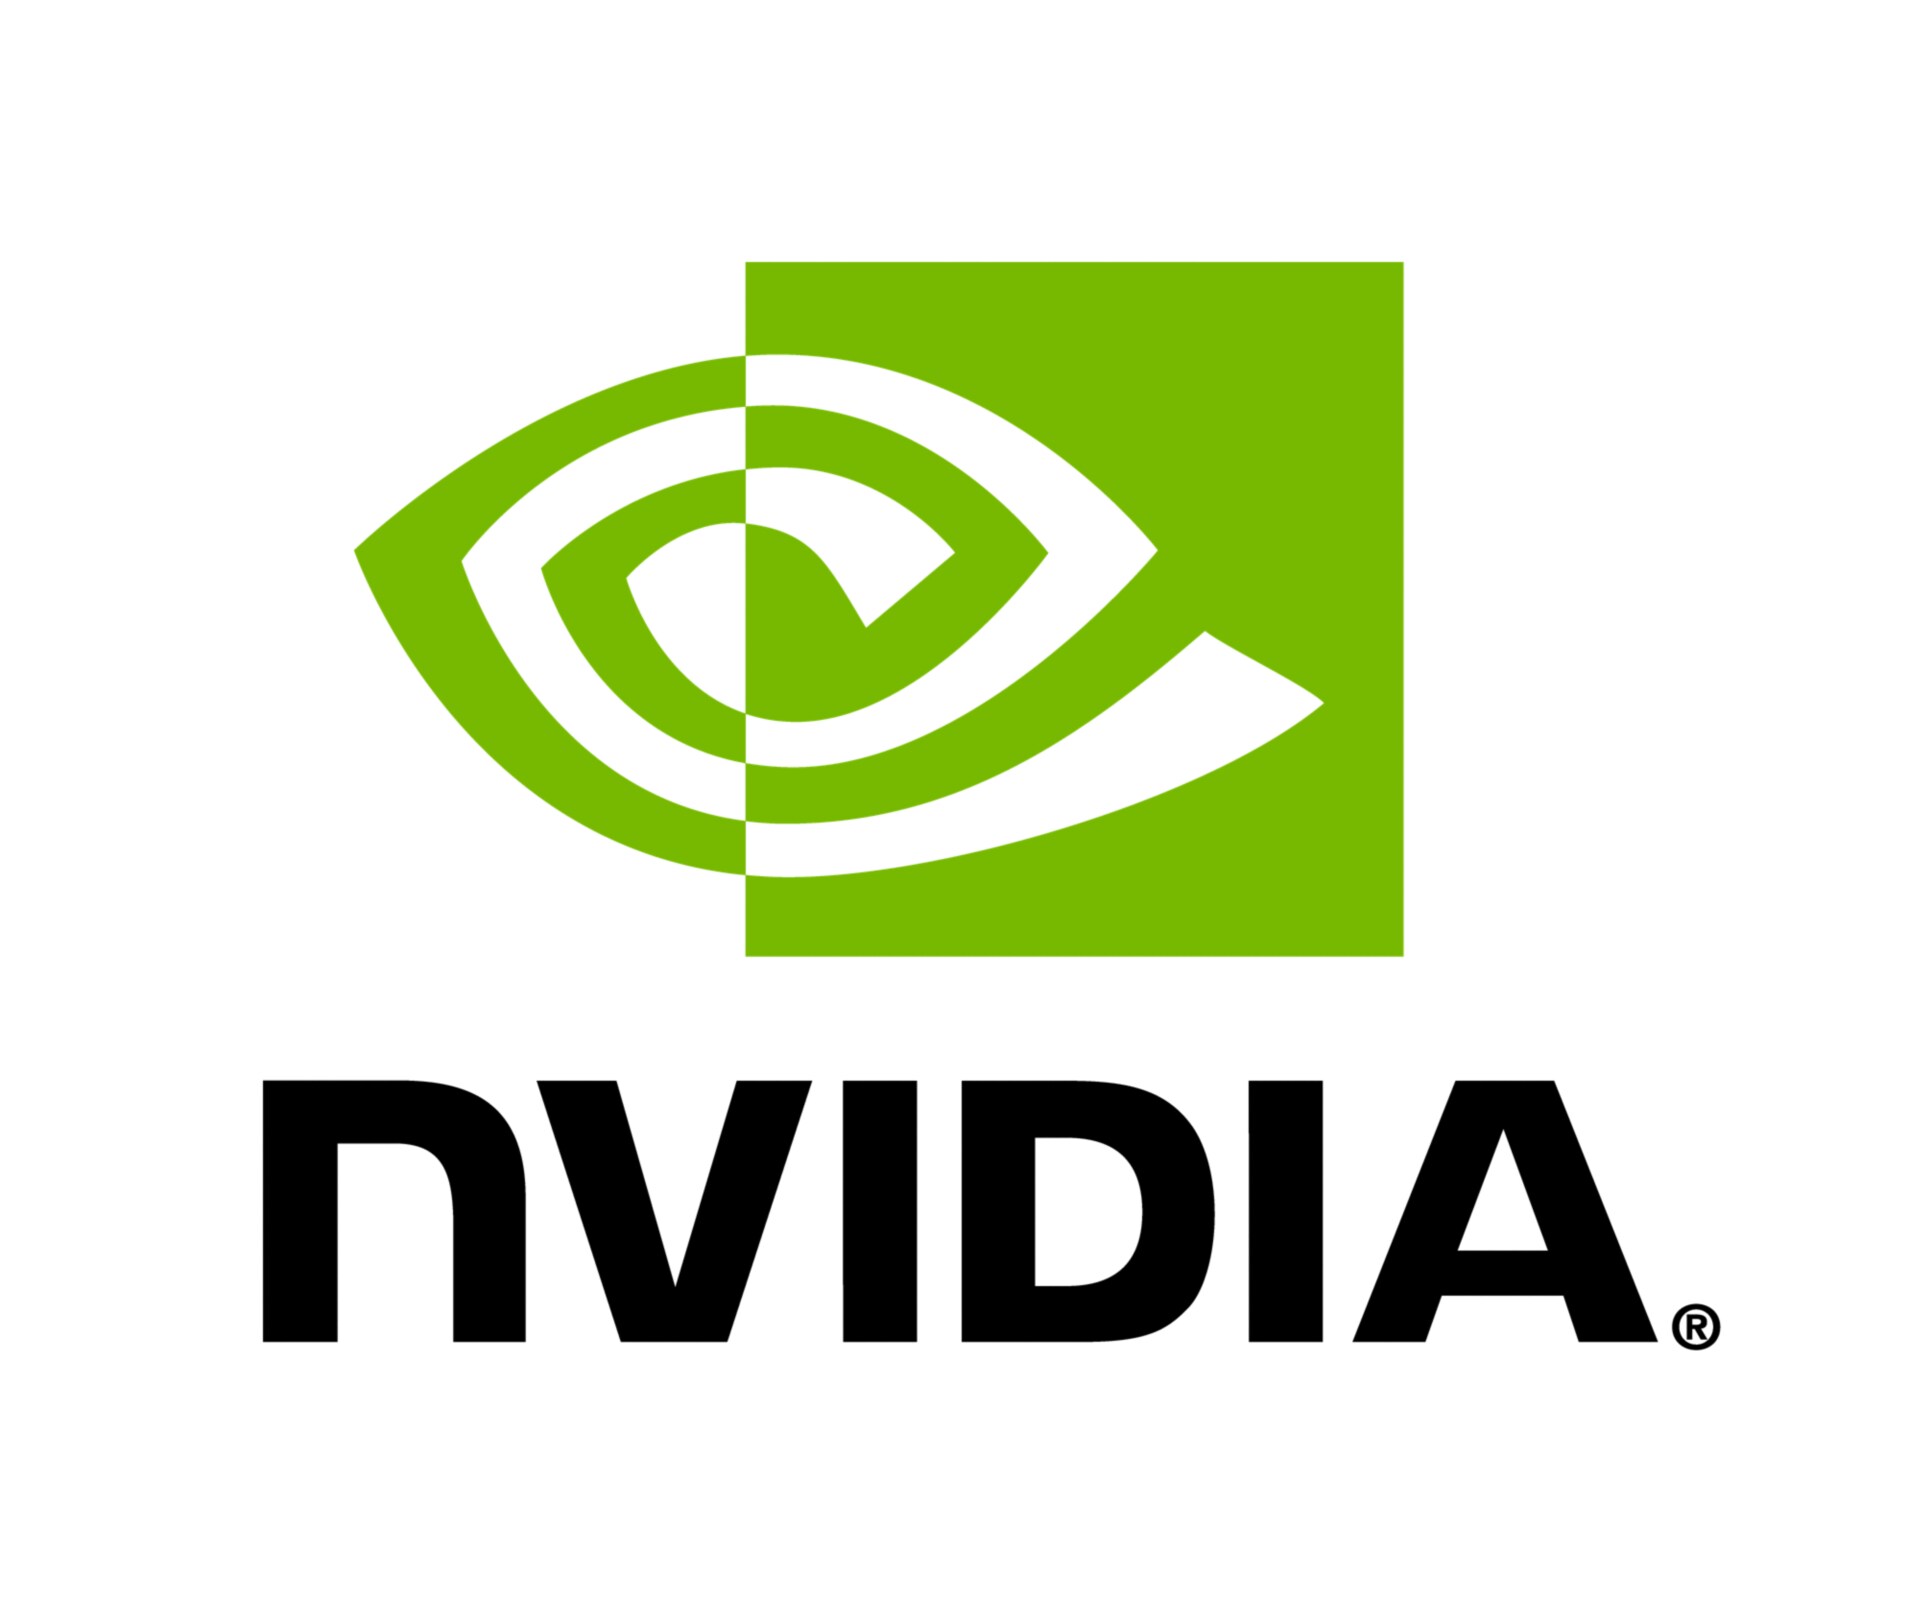 NVIDIA Grid Virtual PC - subscription license renewal (5 months) - 1 concurrent user